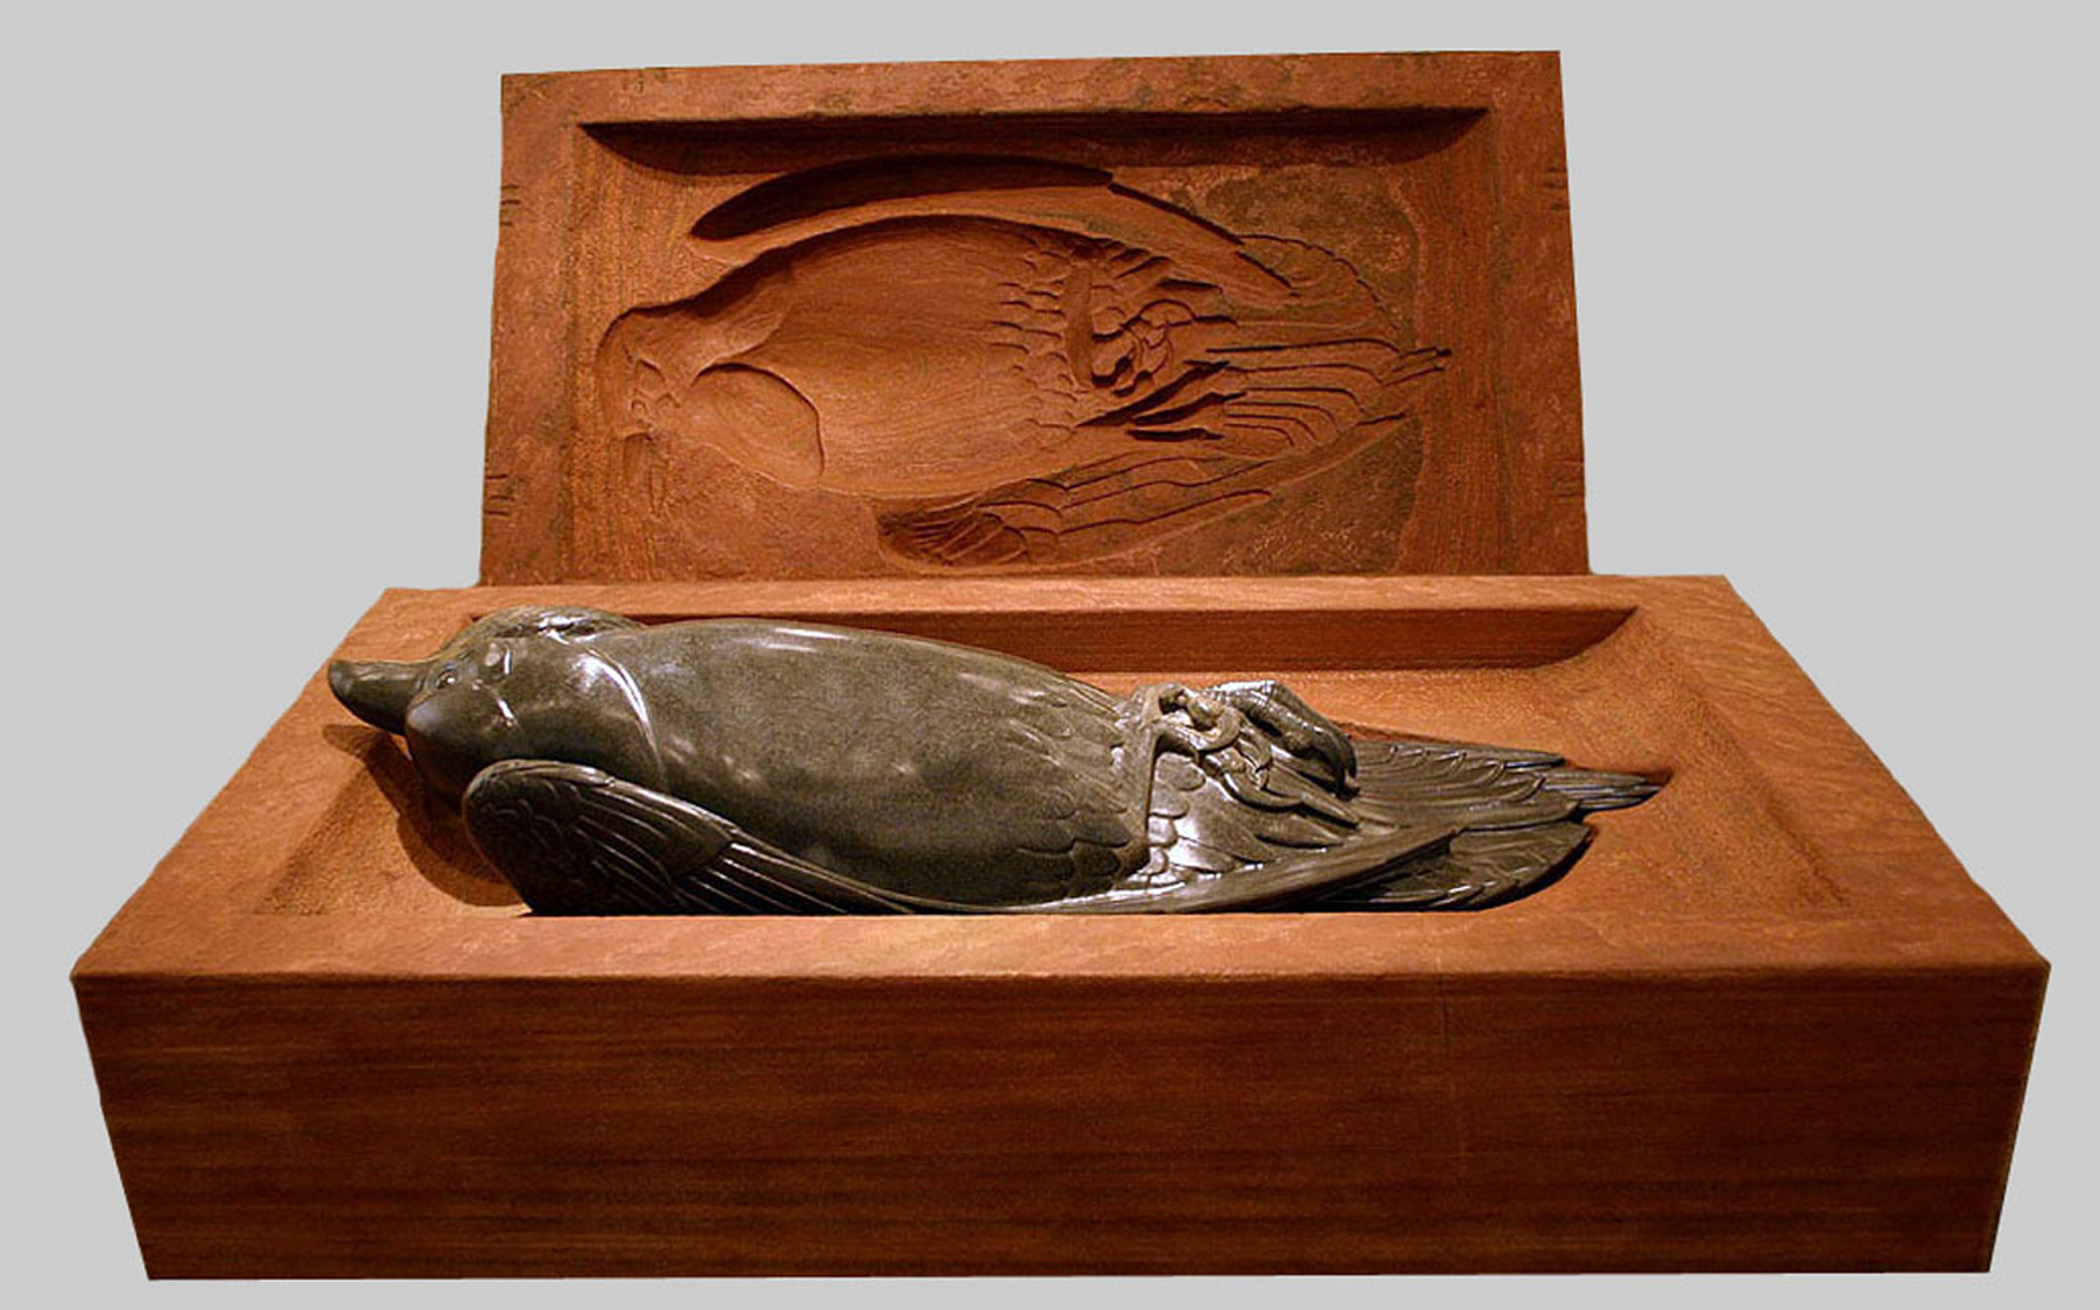 From "Conservation Gallery": Steve Kestrel, "Silent Messenger," 2005.  Wyoming black granite, Colorado red sandstone, steel. Generously sponsored by an anonymous donor.